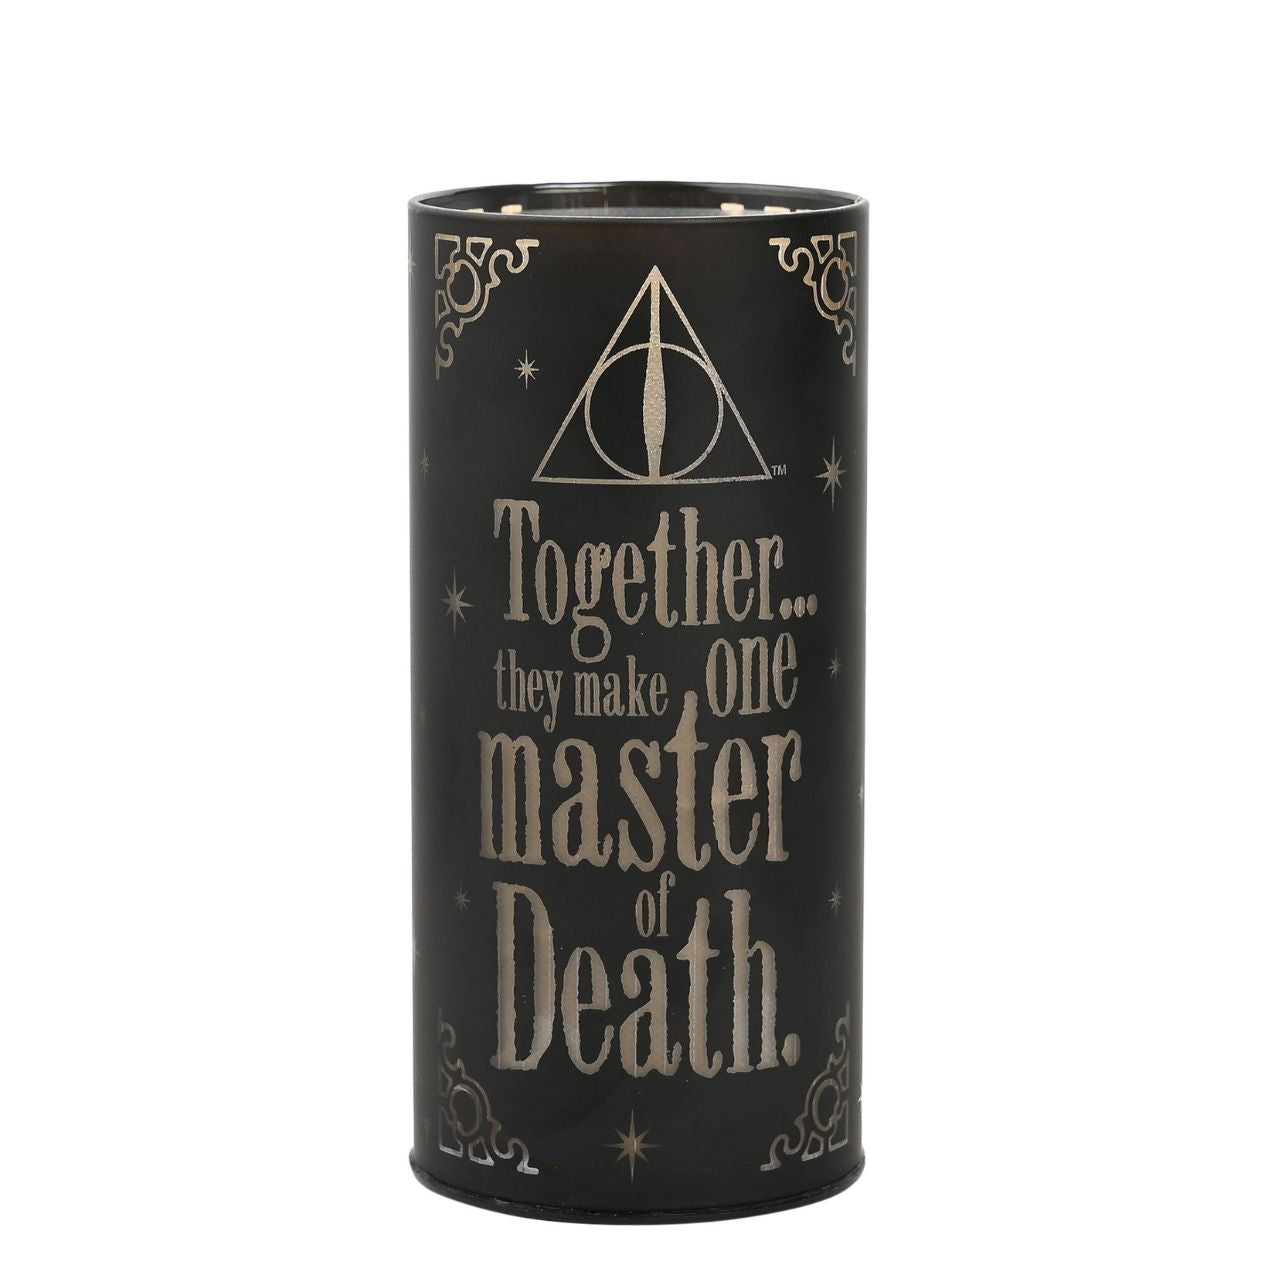 Illuminate your love for the wizarding world with this Deathly Hallows light up tube, from Harry Potter Dark Arts by WARNER BROS.